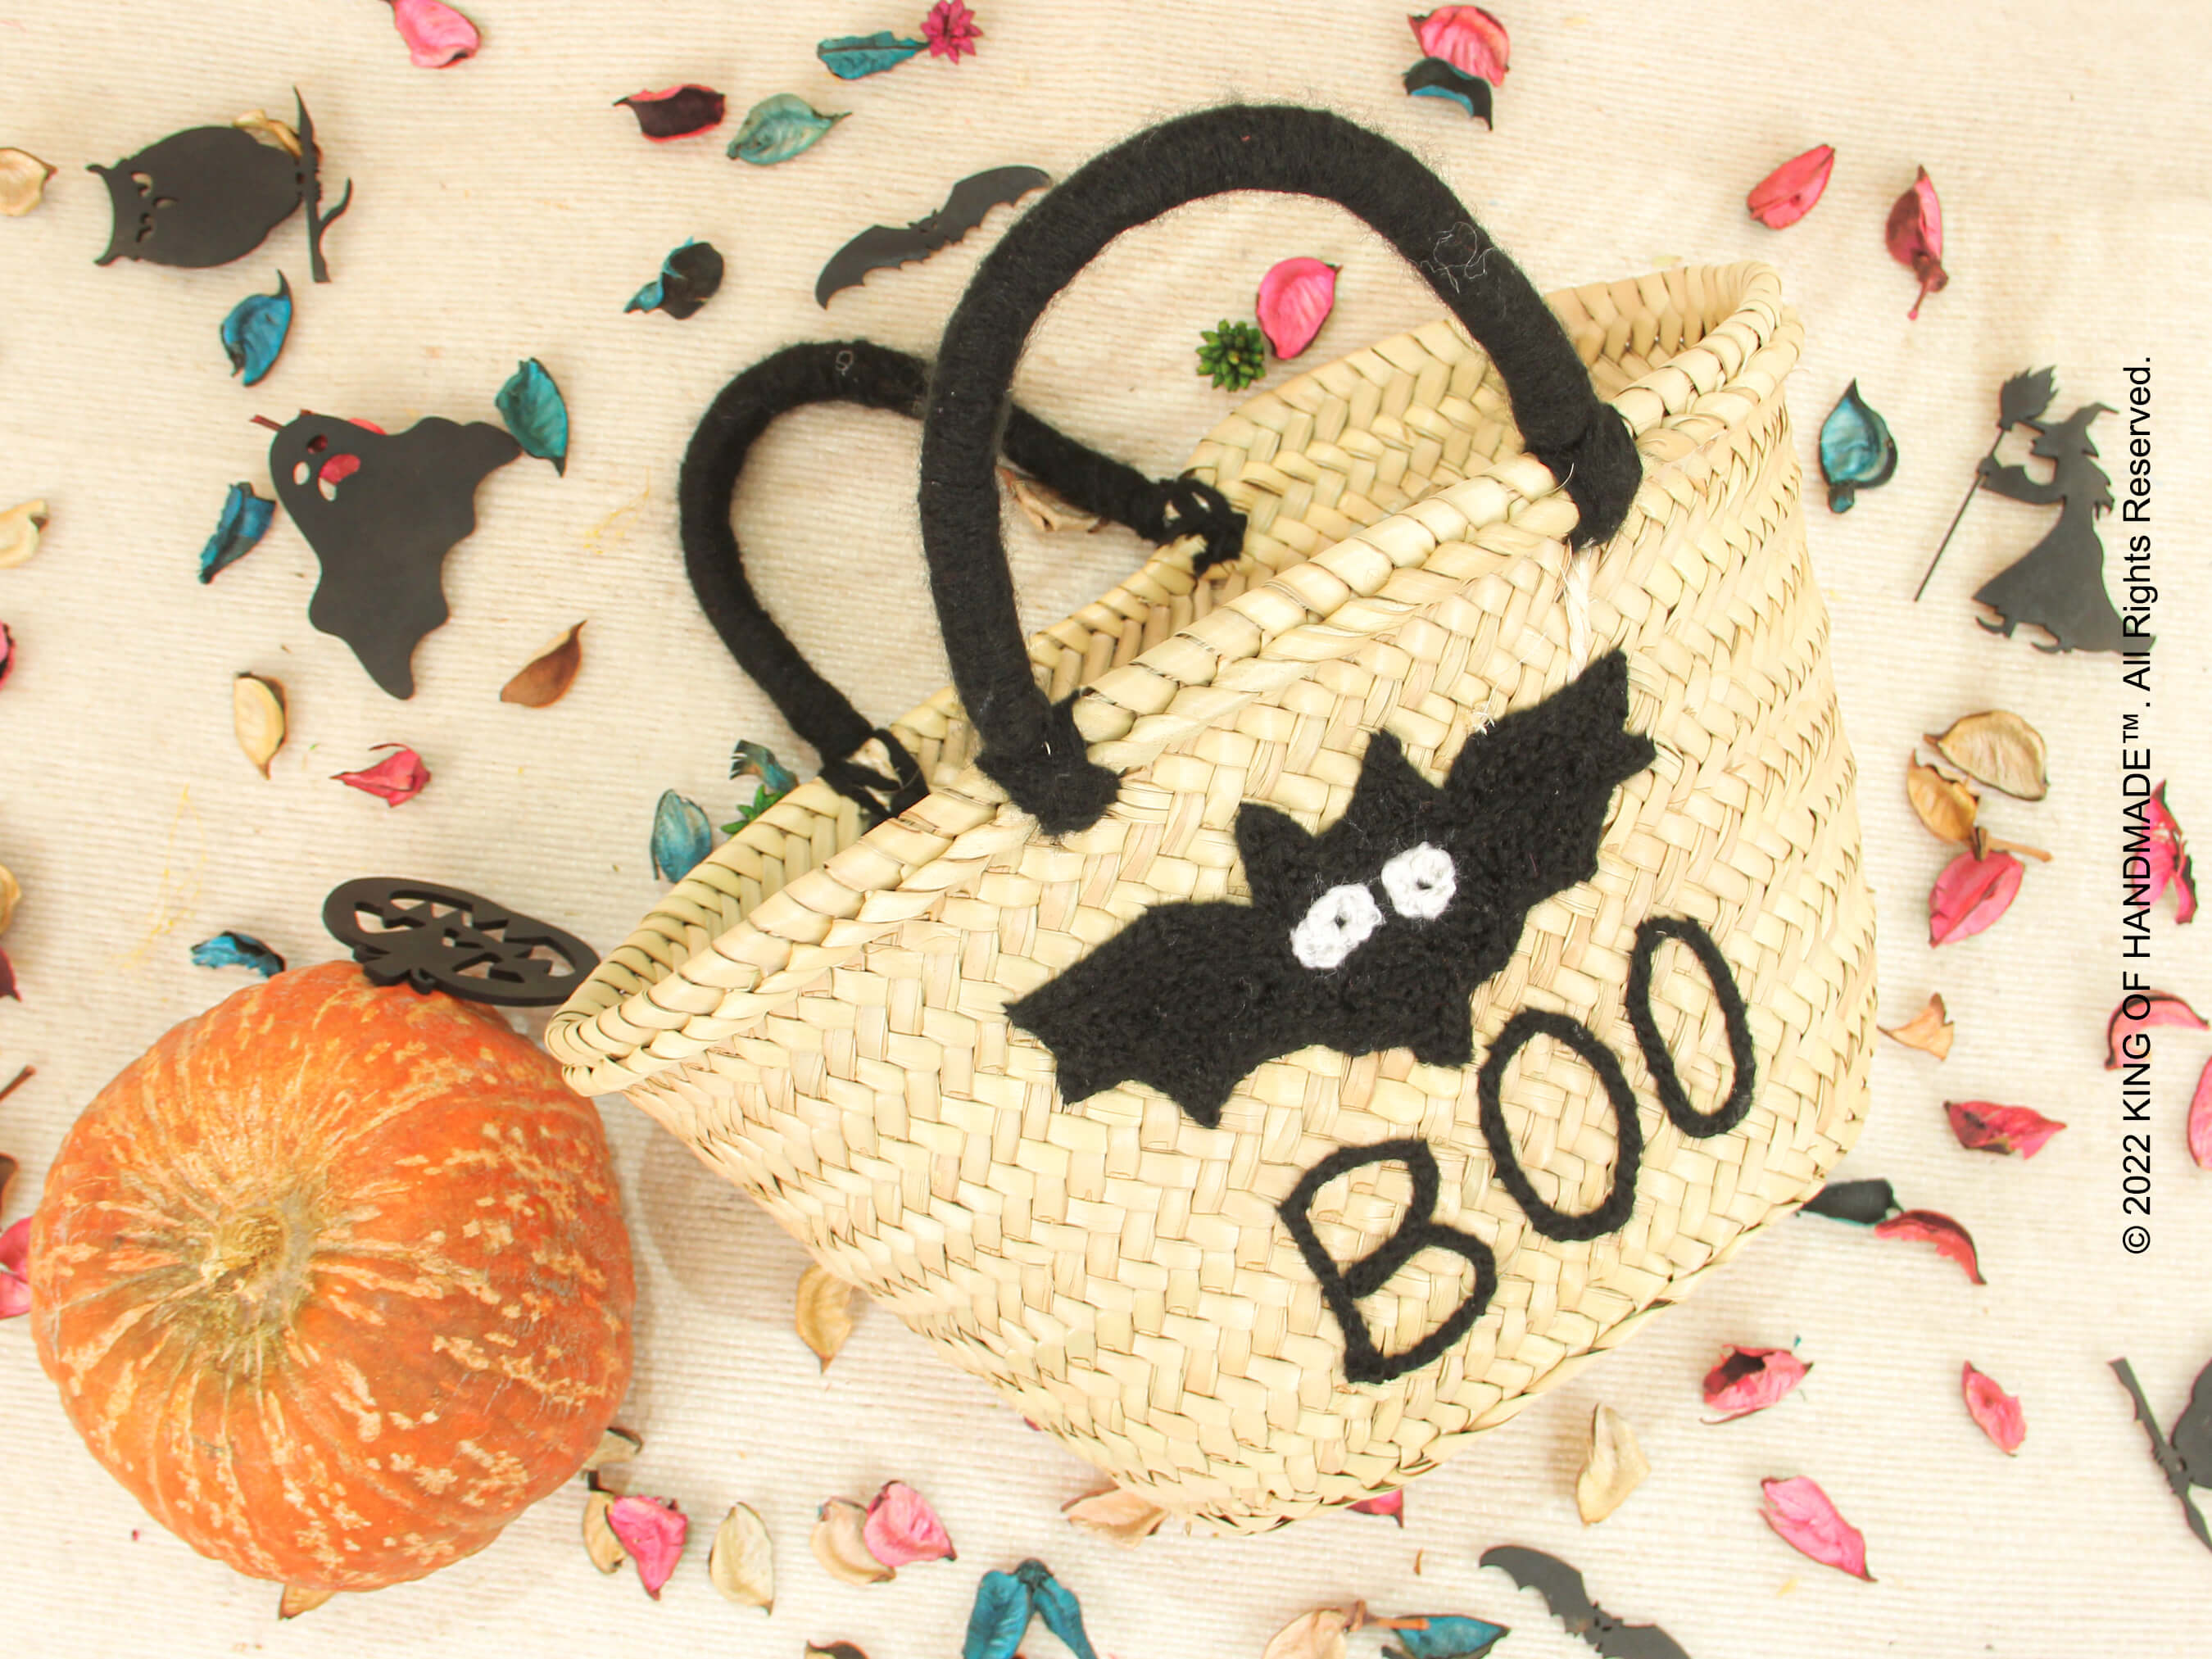 Boo Pack ! Personalized Halloween Bag & Hat